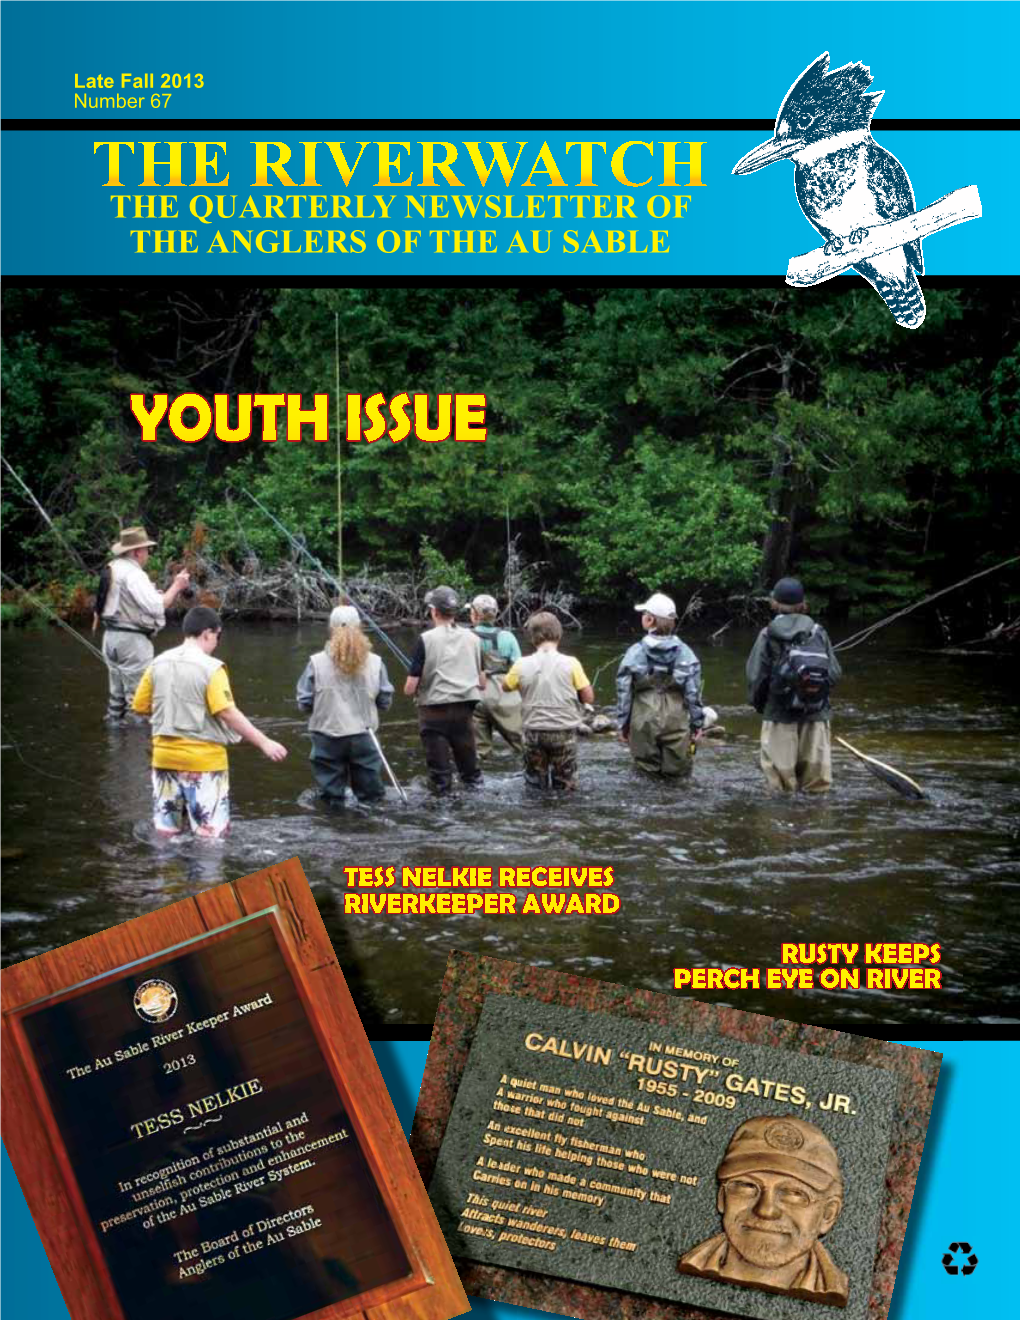 The Riverwatch the Quarterly Newsletter of the Anglers of the Au Sable